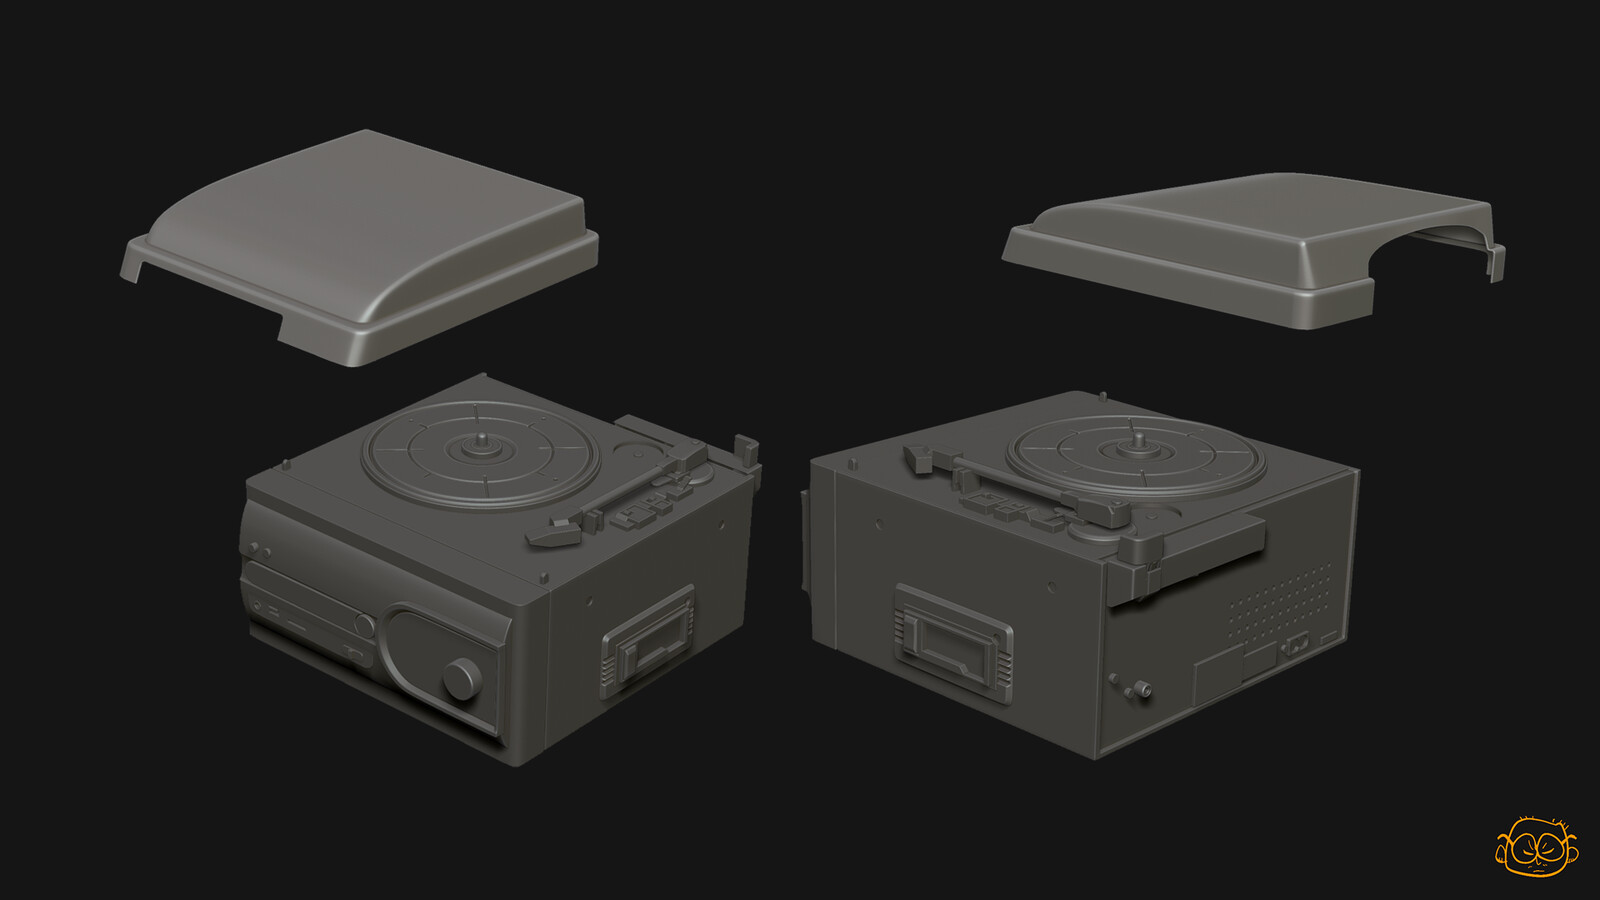 Highpoly mesh for the turntable. Not all parts are modeled yet in this phase, like the details next to the rotary arm. 